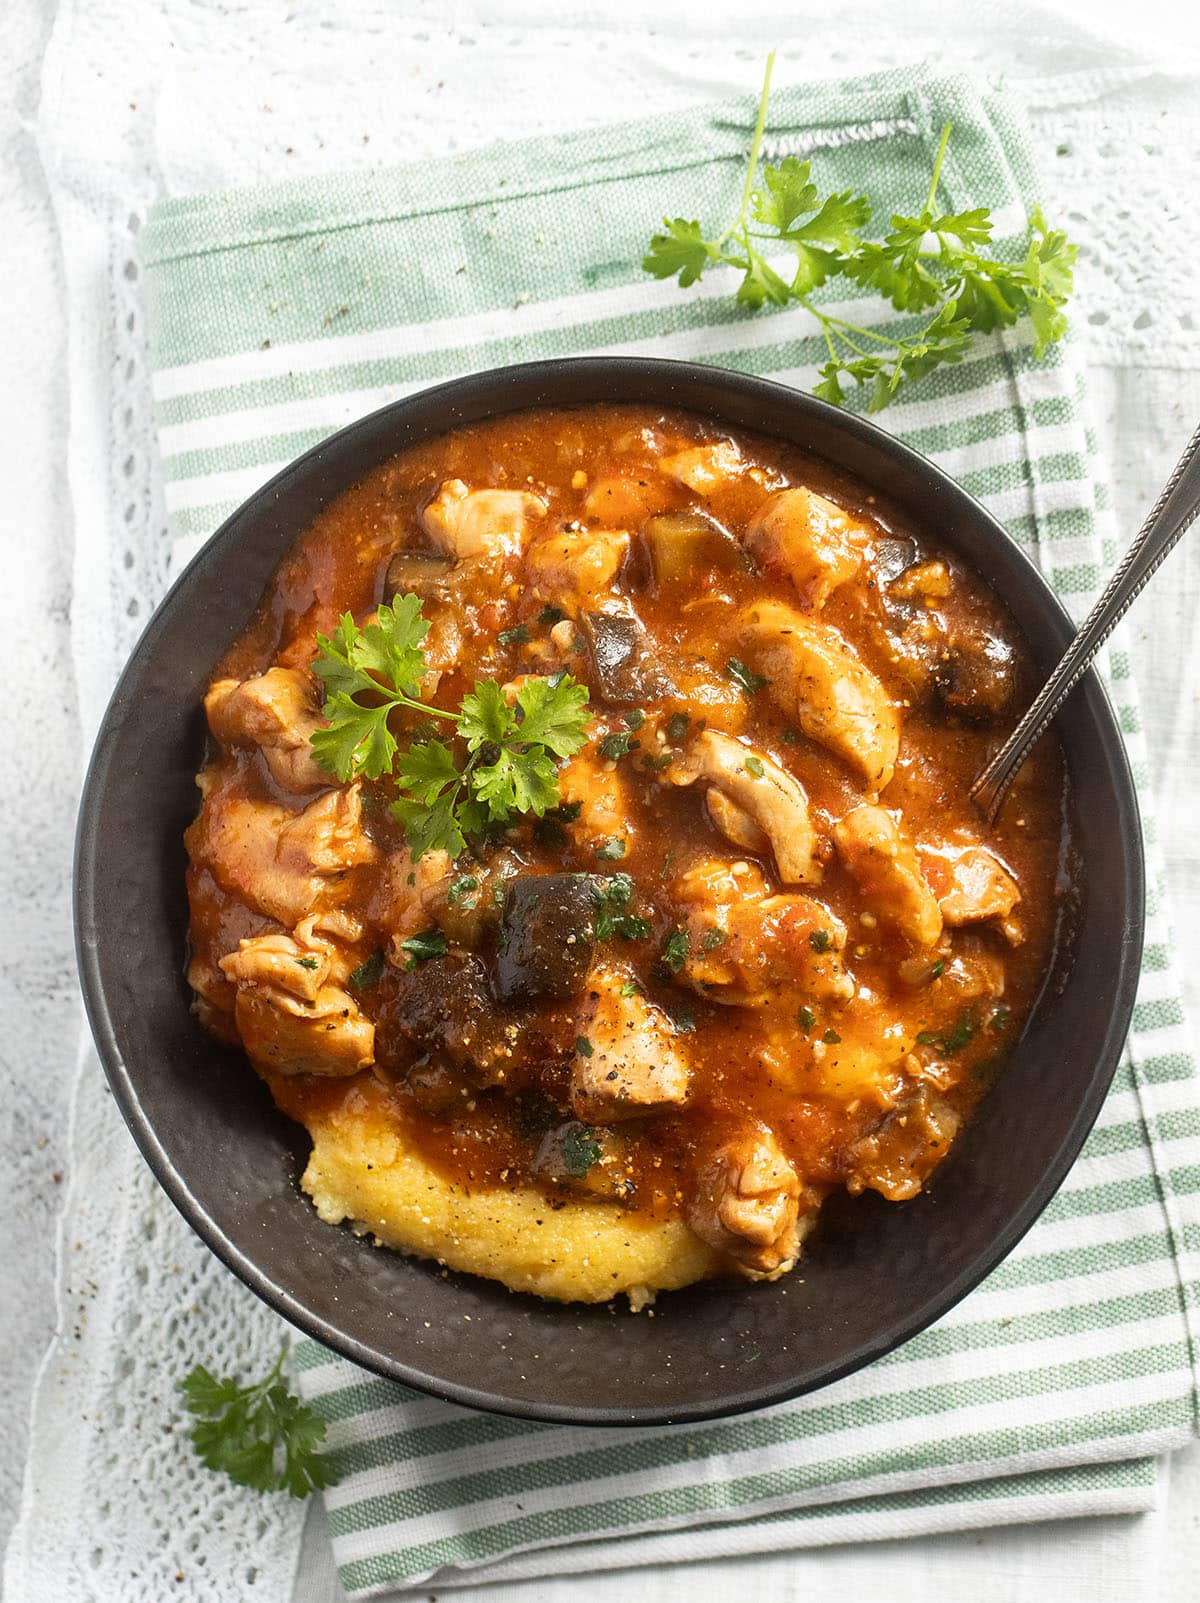 overhead view of a bowl with chicken and eggplants cooked in tomato sauce and serve with polenta.